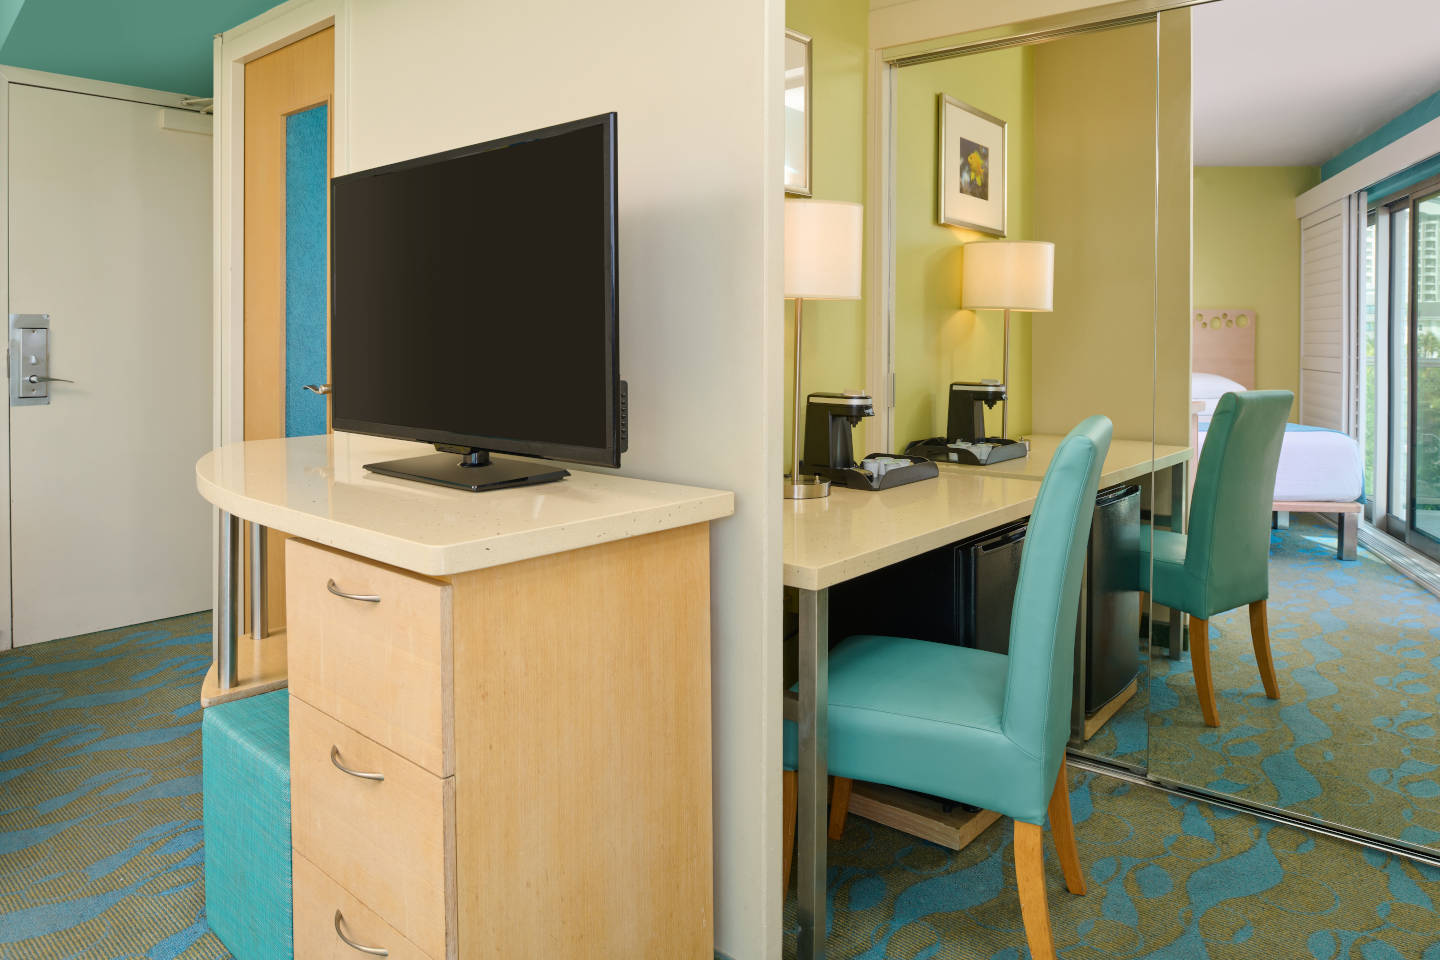 Oceanfront Room amenities include a desk seating area and television